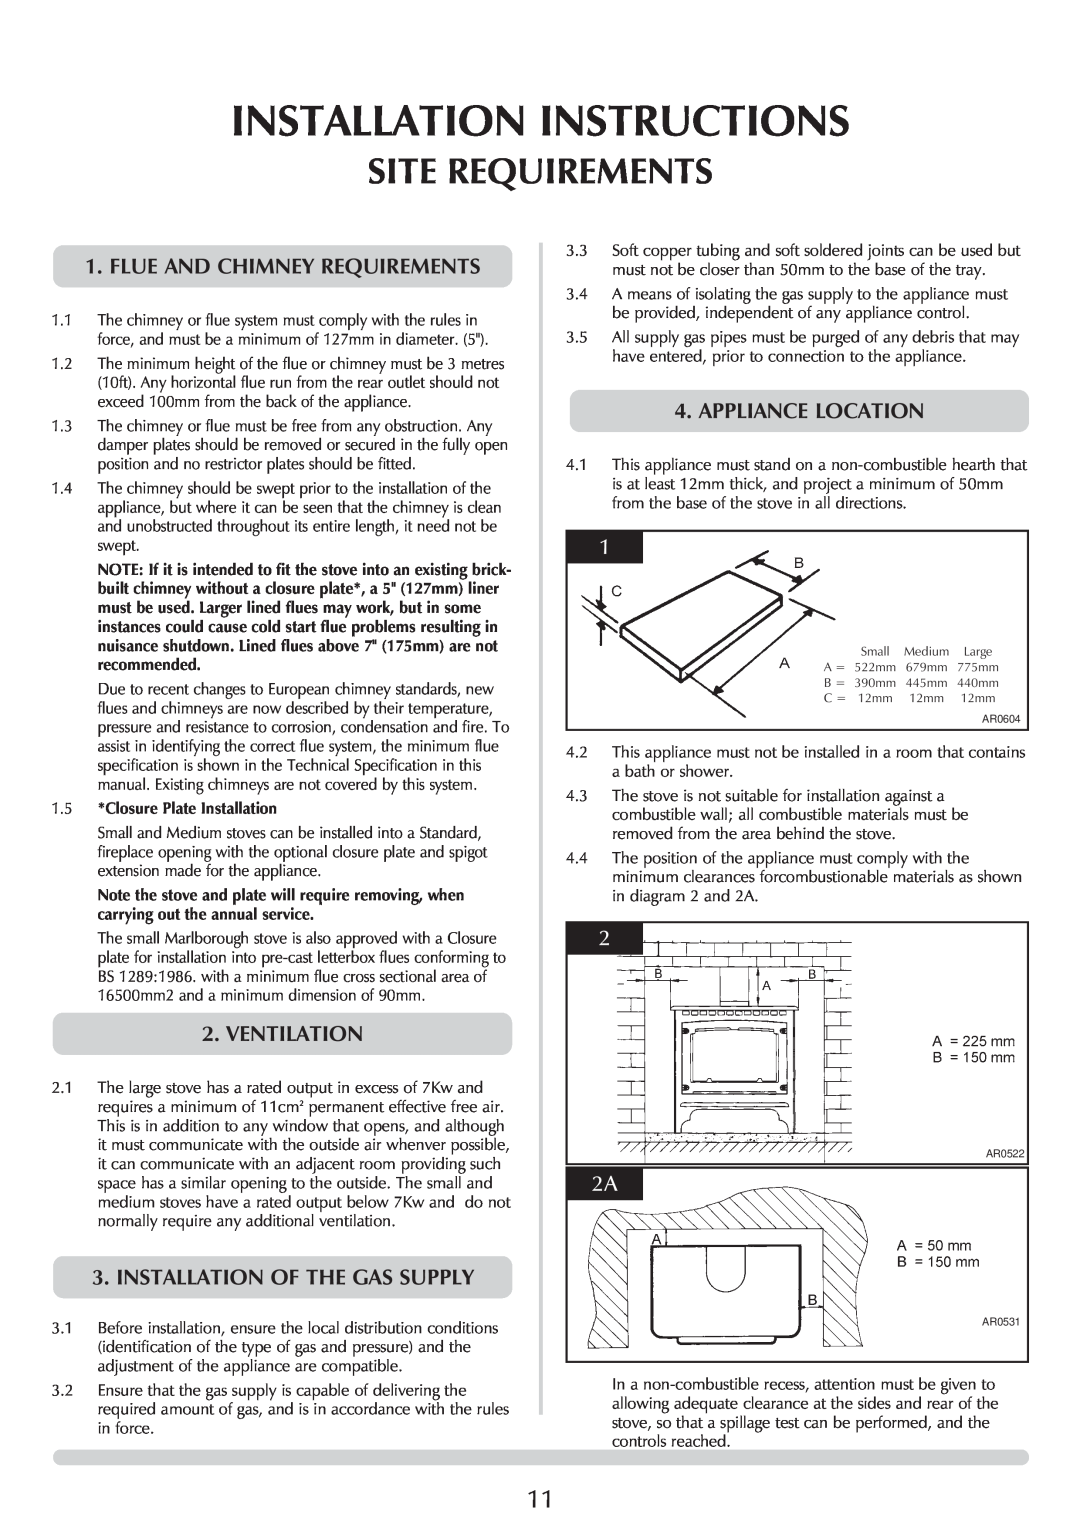 Stovax Stockton 8573, P8564, P8574 Site Requirements, Installation Instructions, Flue And Chimney Requirements, Ventilation 